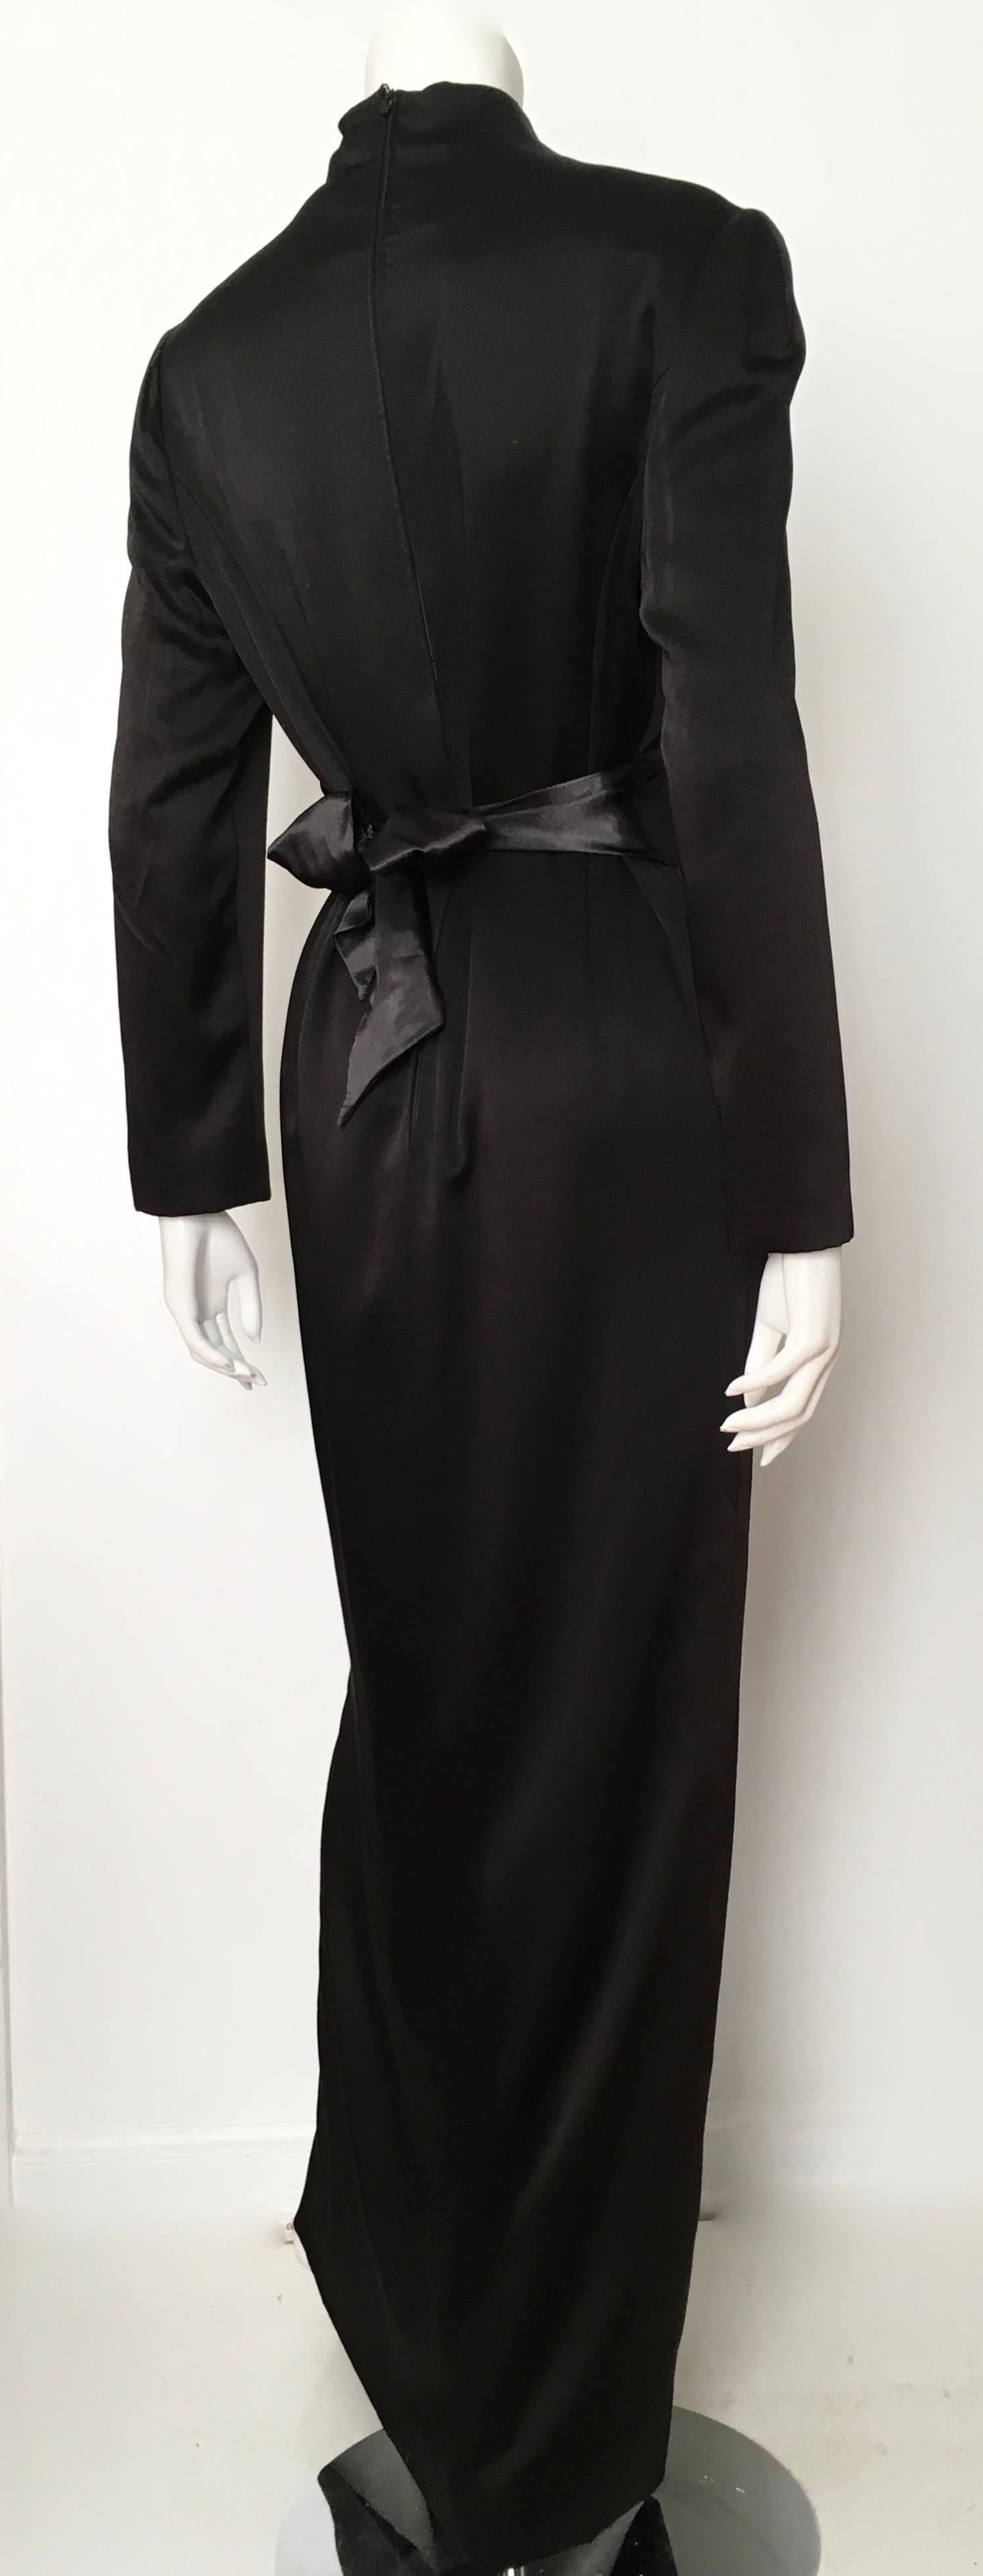 Genny Black Kimono Style Silk Long Gown Size 10 / 12. Never Worn. For Sale 1